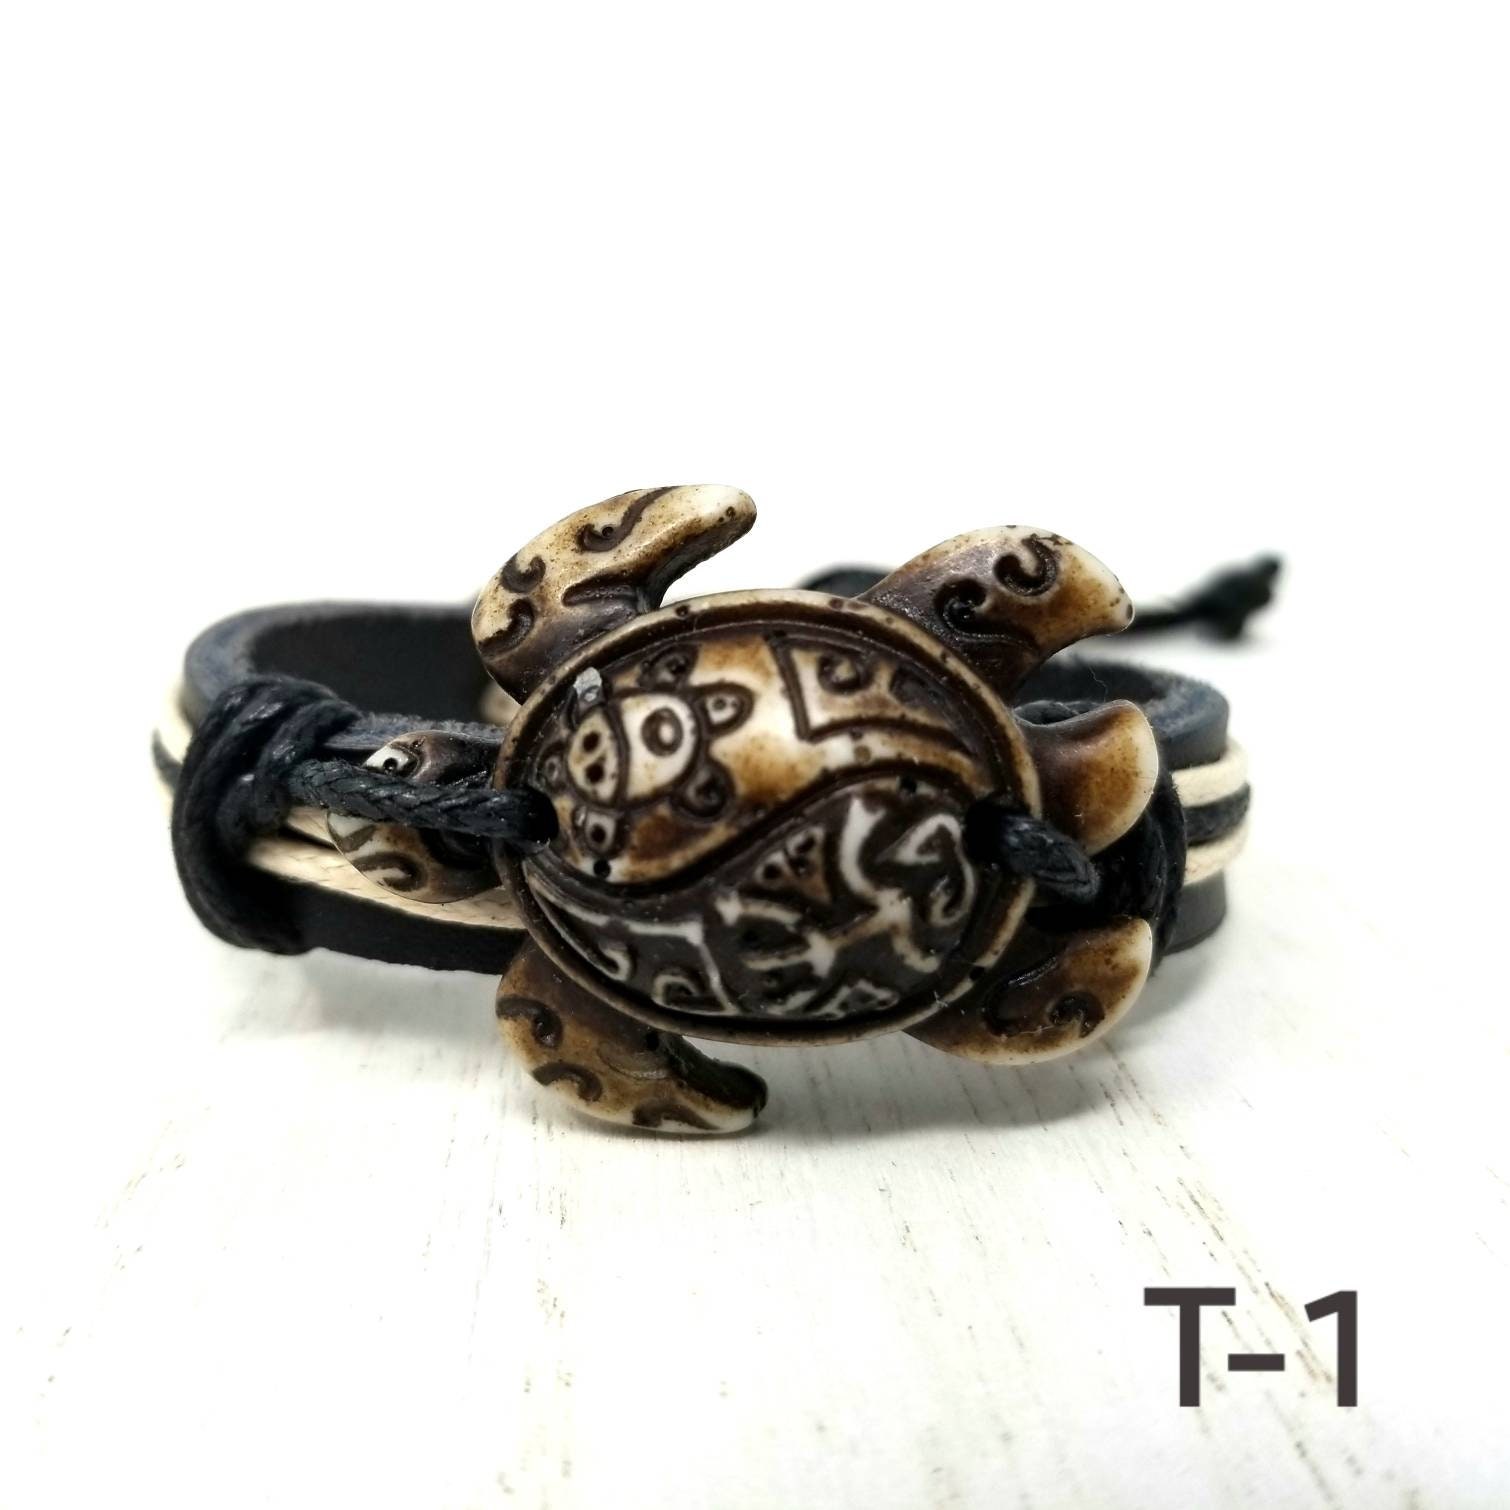 Nature Bracelet with Coquí (Tree Frog), Sun with Diamonds, and Leatherback Sea-Turtle Charms